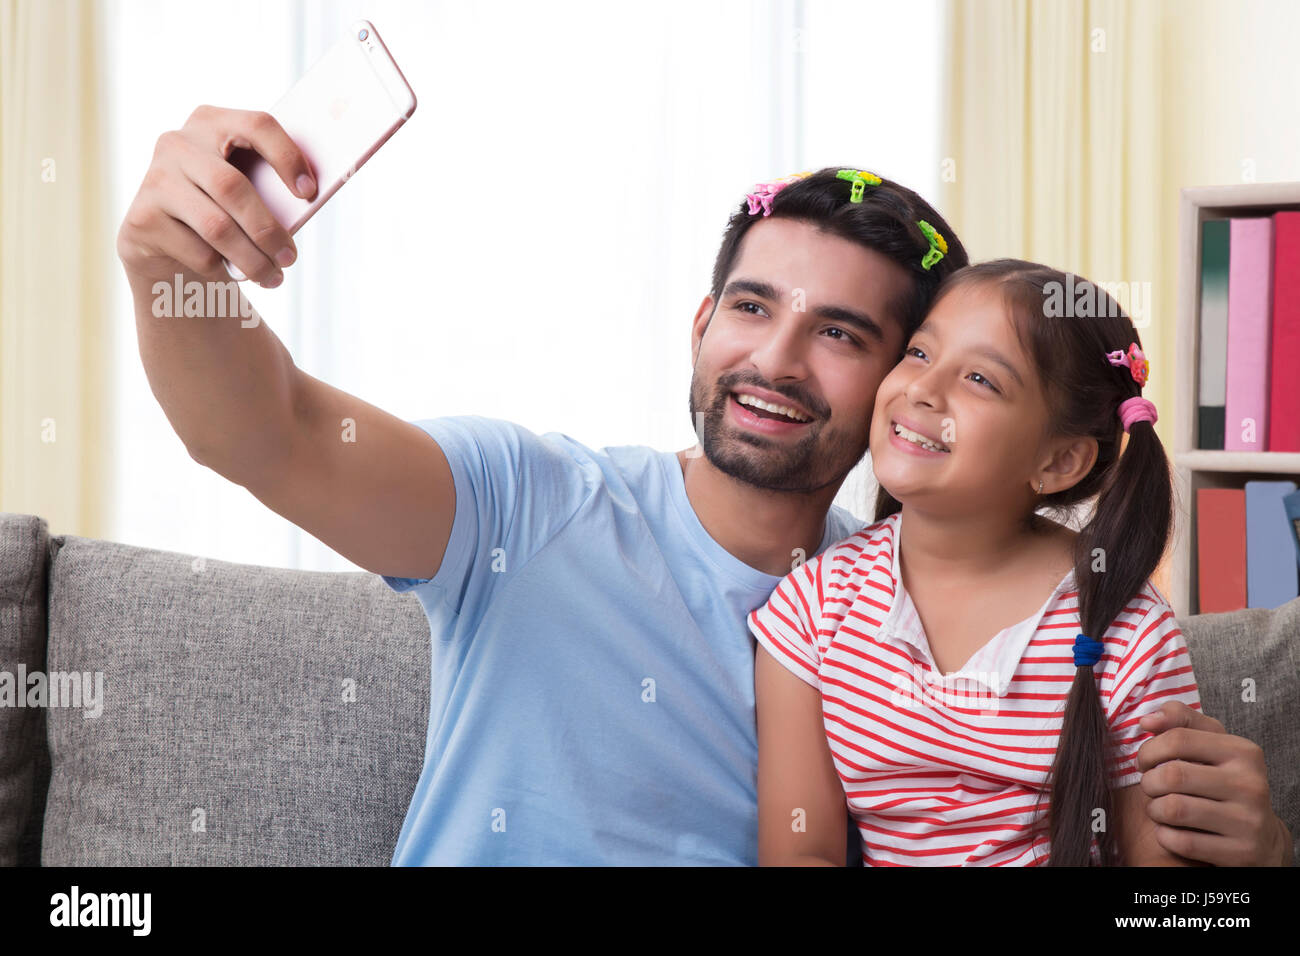 Funny father wearing hair clips and daughter taking selfie Stock Photo